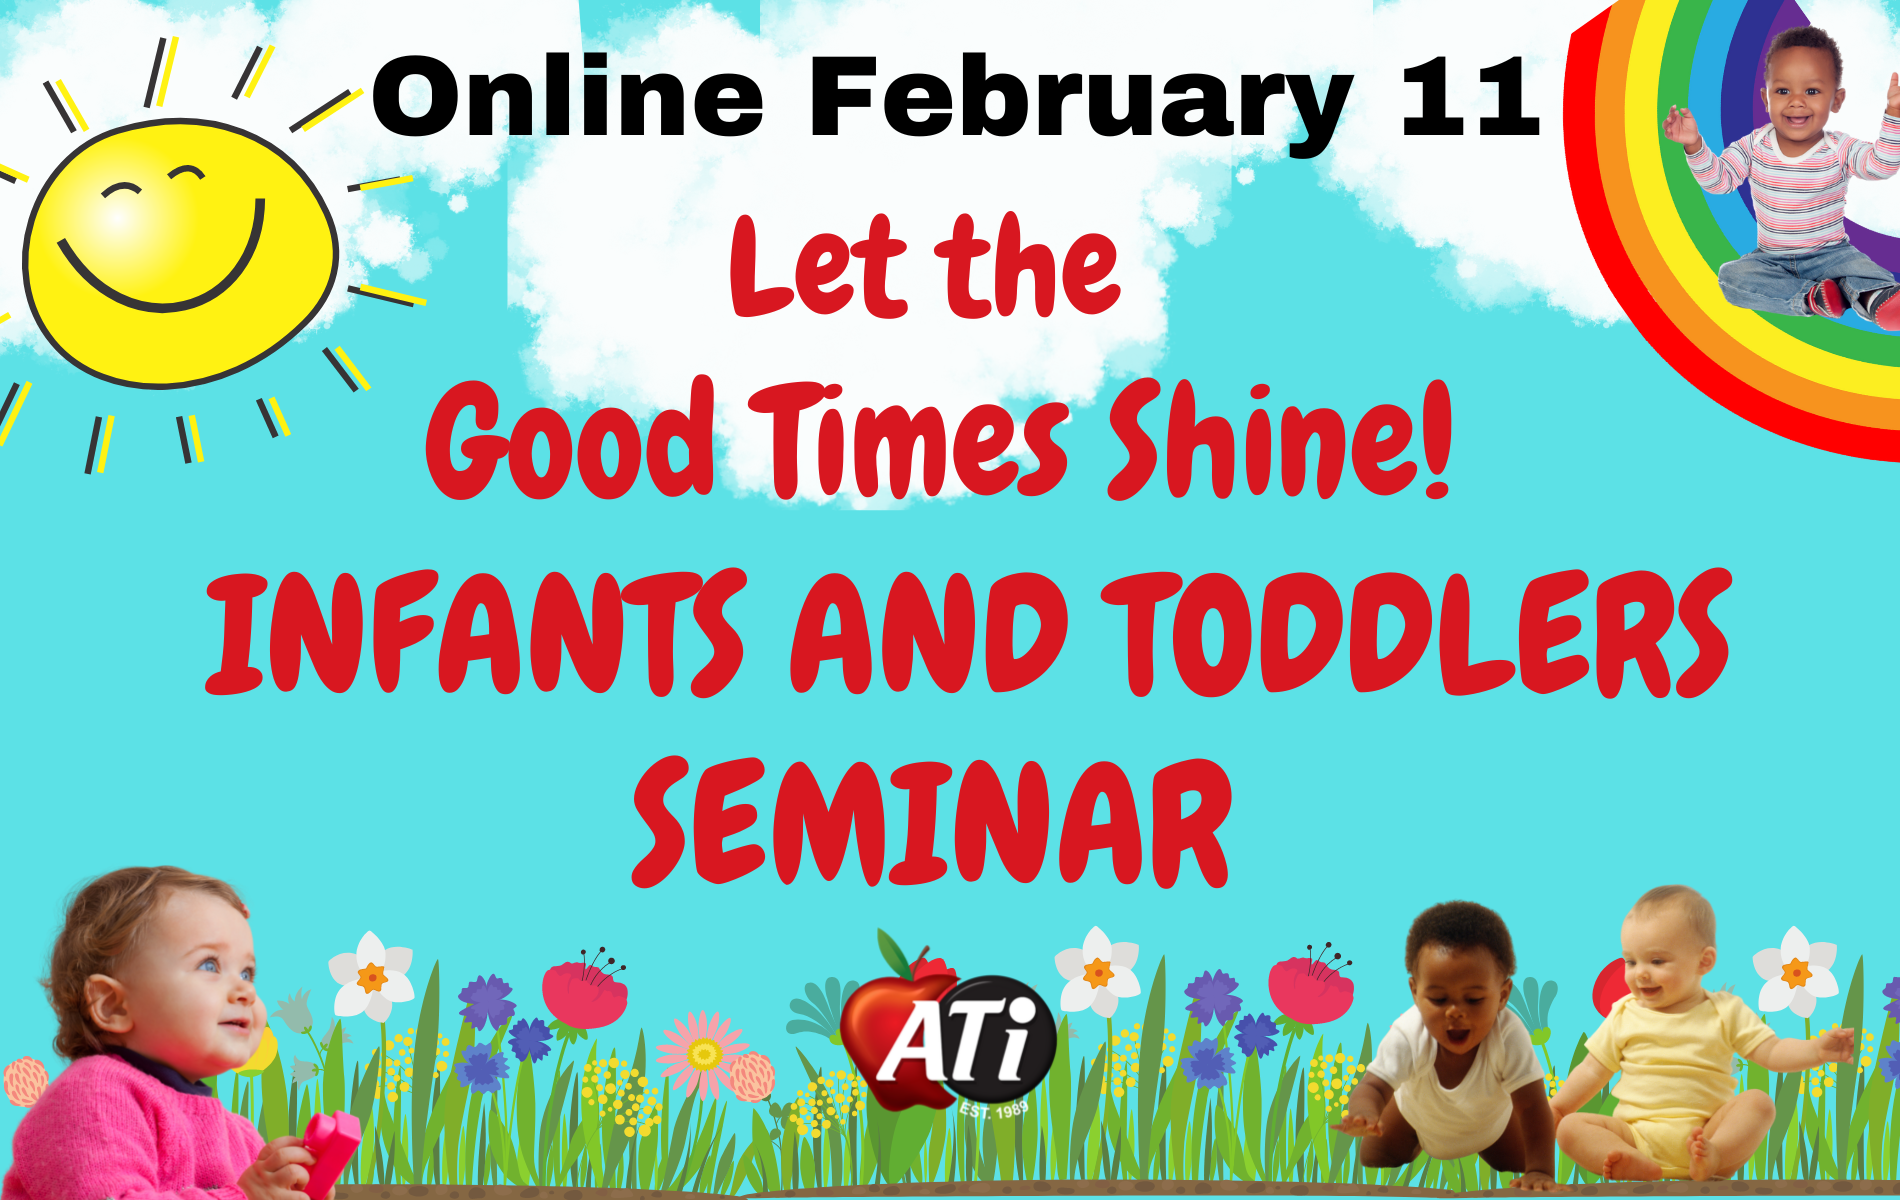 Image for Let The Good Times Shine Infants and Toddlers Seminar - Online